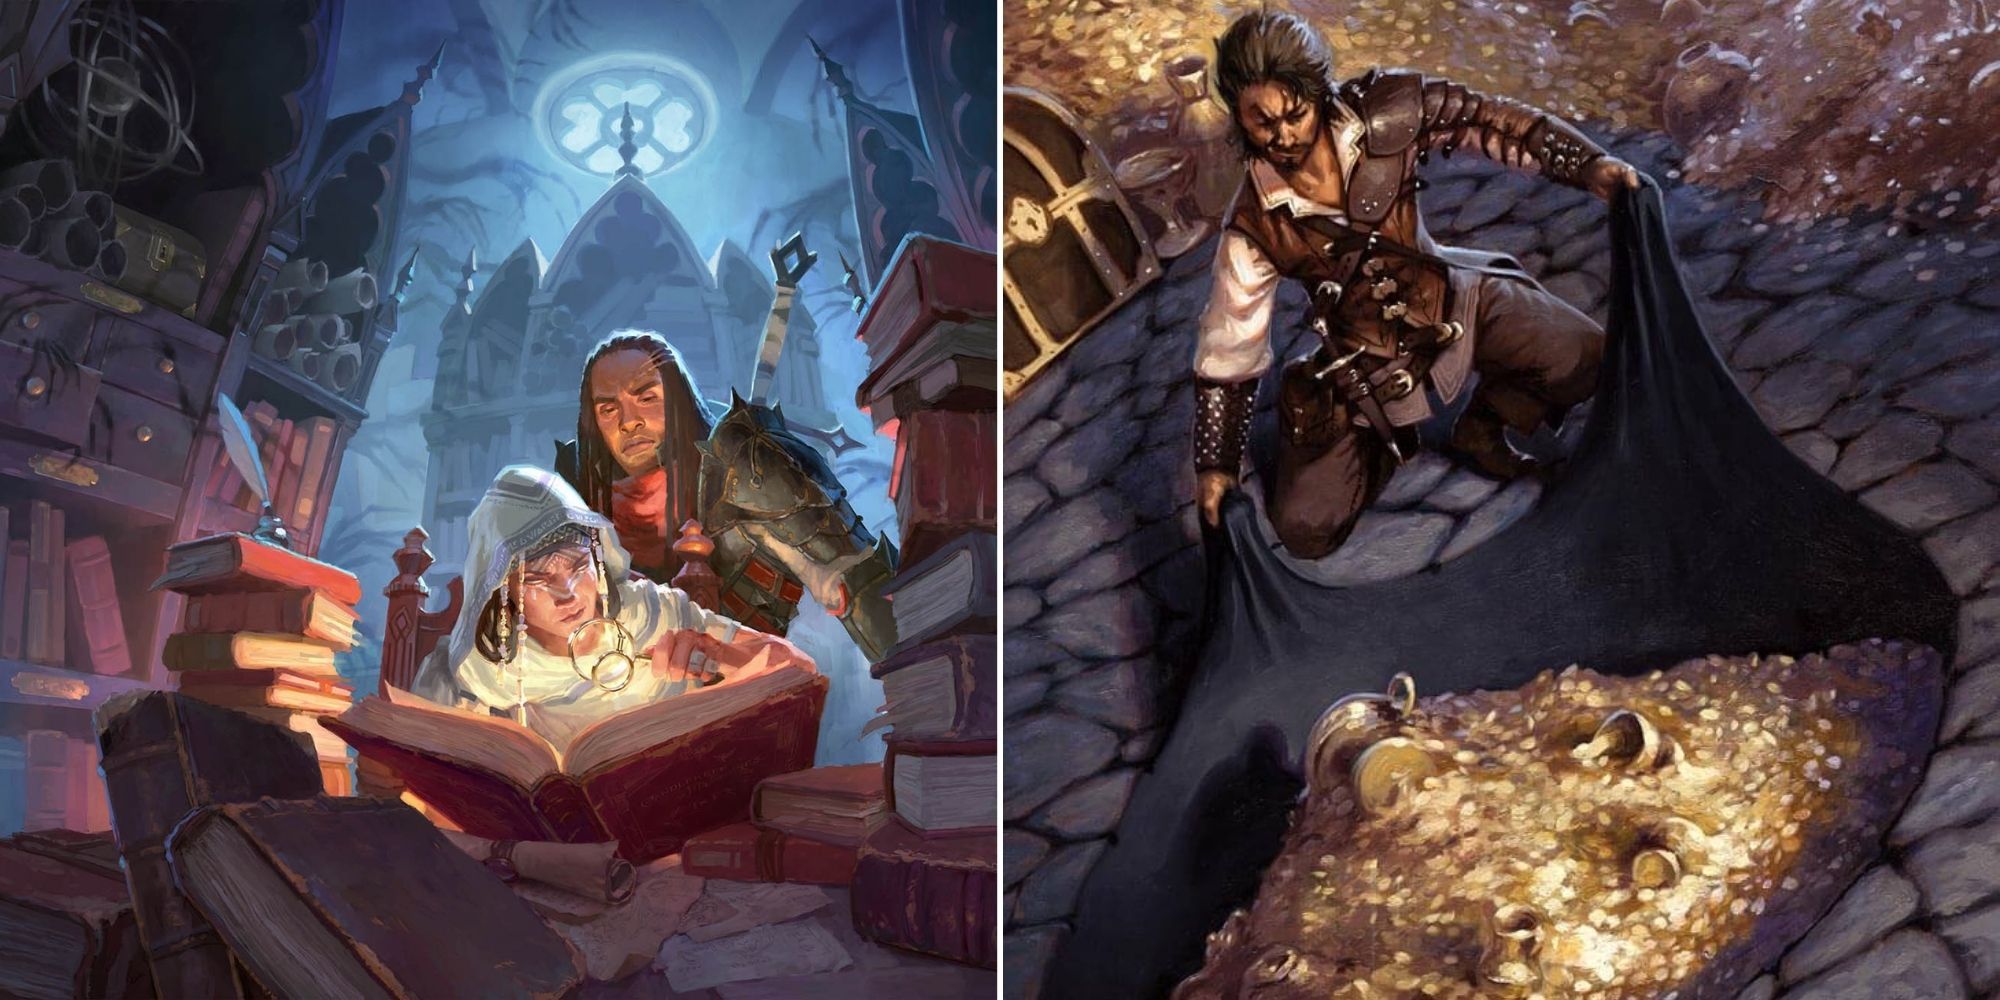 D&D Candlekeep Mysteries artwork of adventurers reading a book in Candlekeep and an adventurer using a portable hole to steal gold